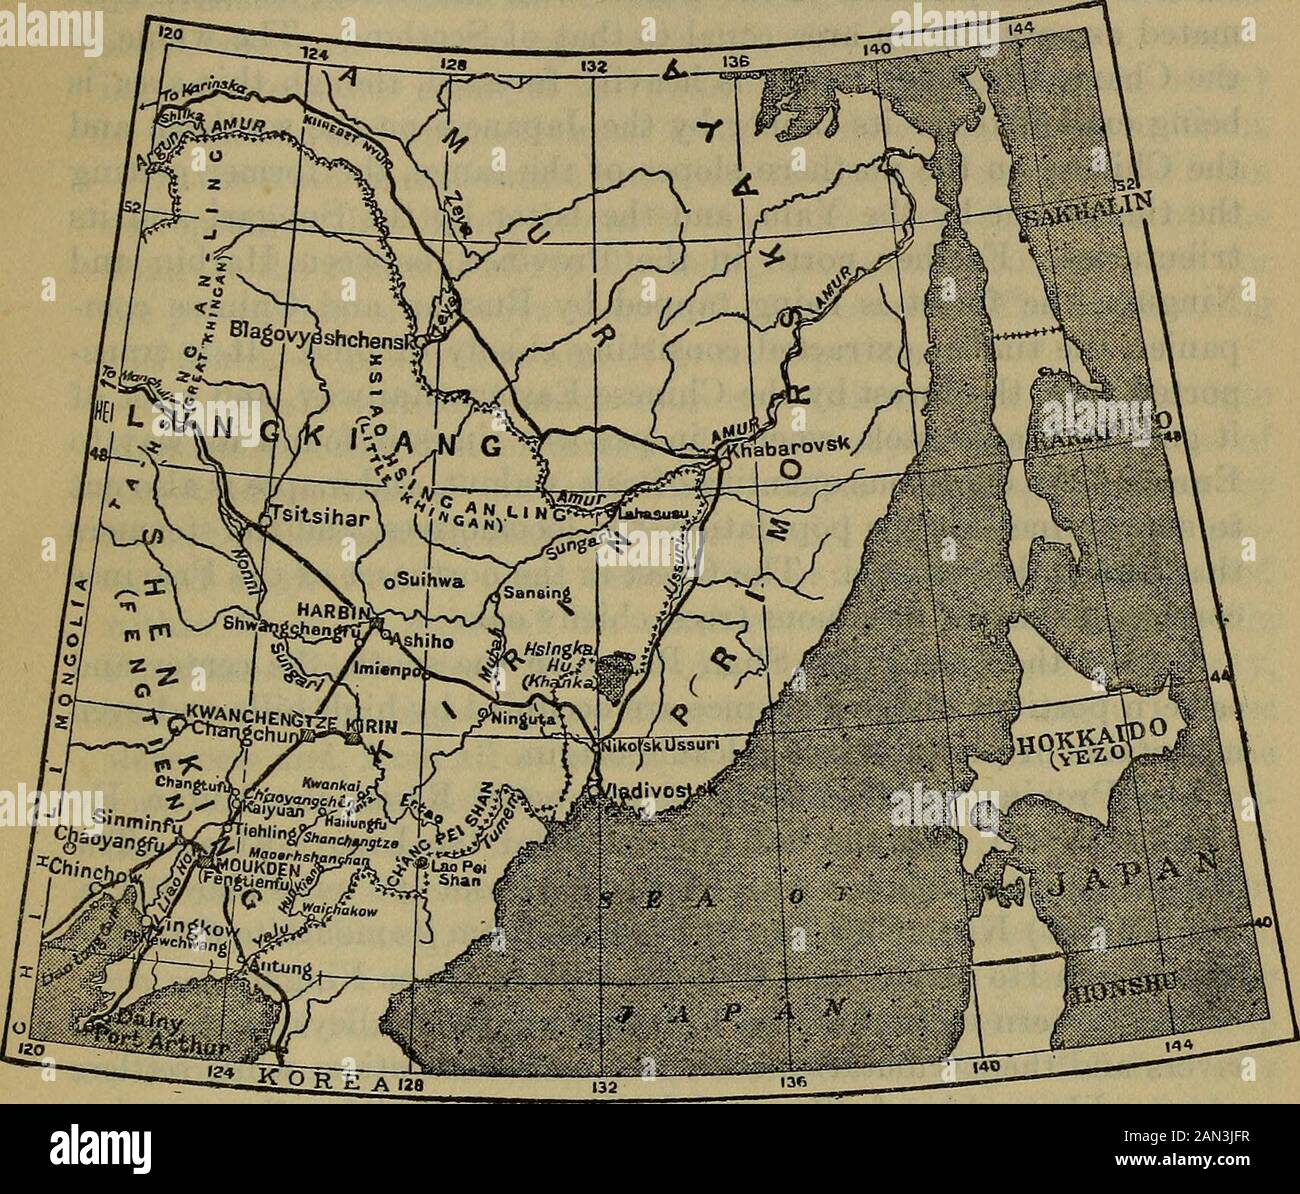 Annual report of the Board of Regents of the Smithsonian Institution . y (Dairen), onthe Liaotung Peninsula, with a short branch to Yingkow. Anotherrunning southeast reaches Antung at the mouth of the Yalu River,which it crosses by means of a magnificent steel bridge, and is con-tinued in Korea as the Chosen Railway. A third, which is really acontinuation of the first, runs north to Changchun, where it makesconnection with the Changchun-Kirih Railway, and a branch of theChinese Eastern Railway which runs south from Harbin. The mainline of the Chinese Eastern Railway runs from Vladivostok to Ma Stock Photo